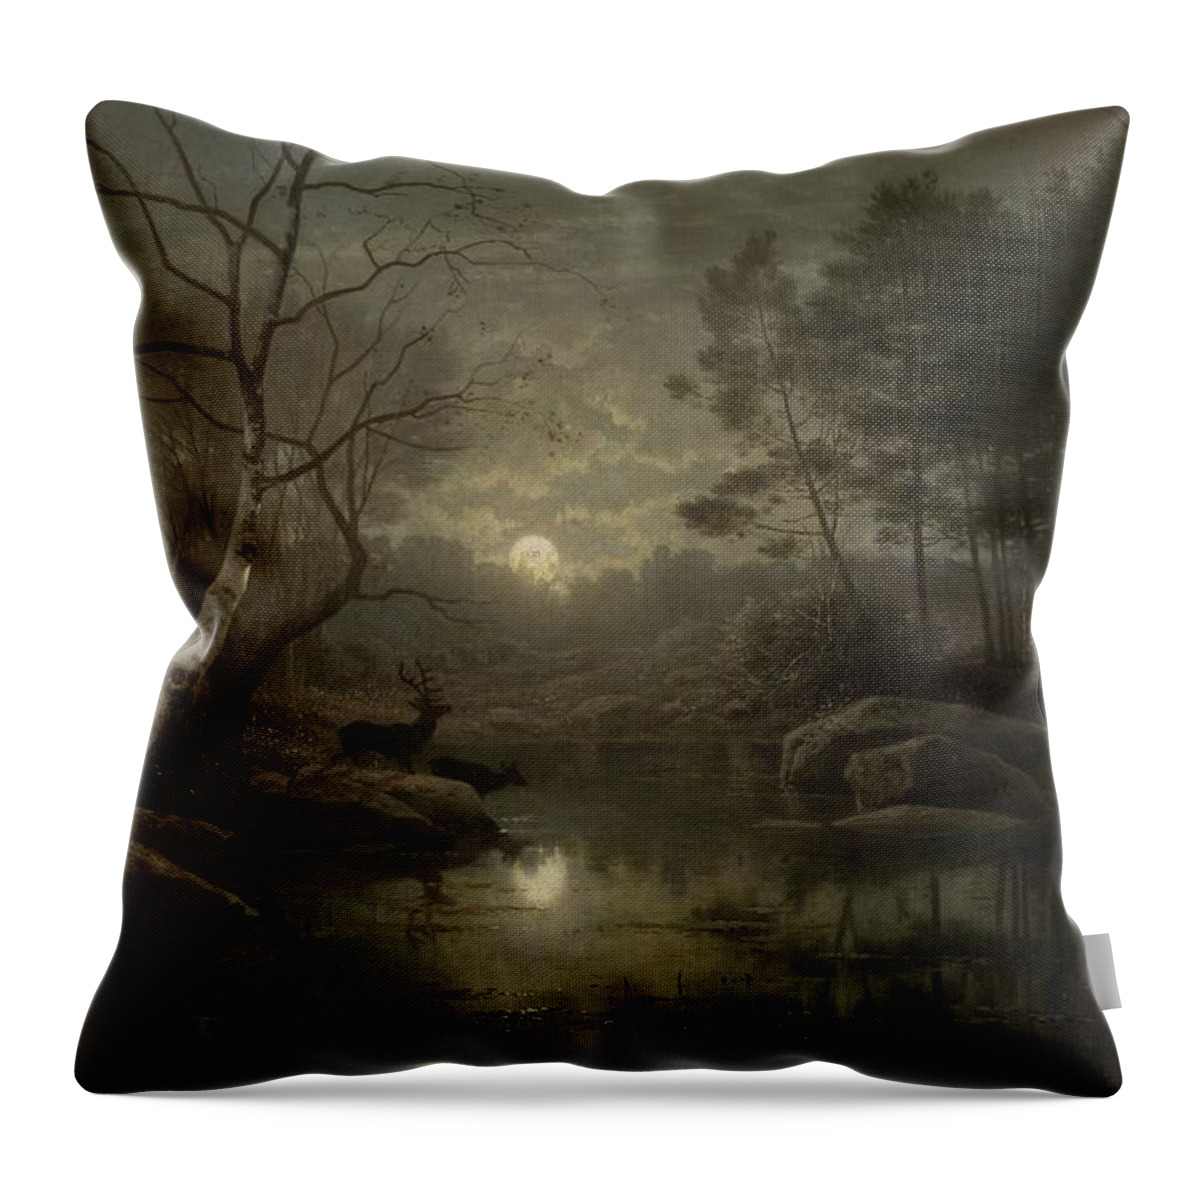 Forest Landscape In The Moonlight Throw Pillow featuring the painting Forest Landscape in the Moonlight by MotionAge Designs